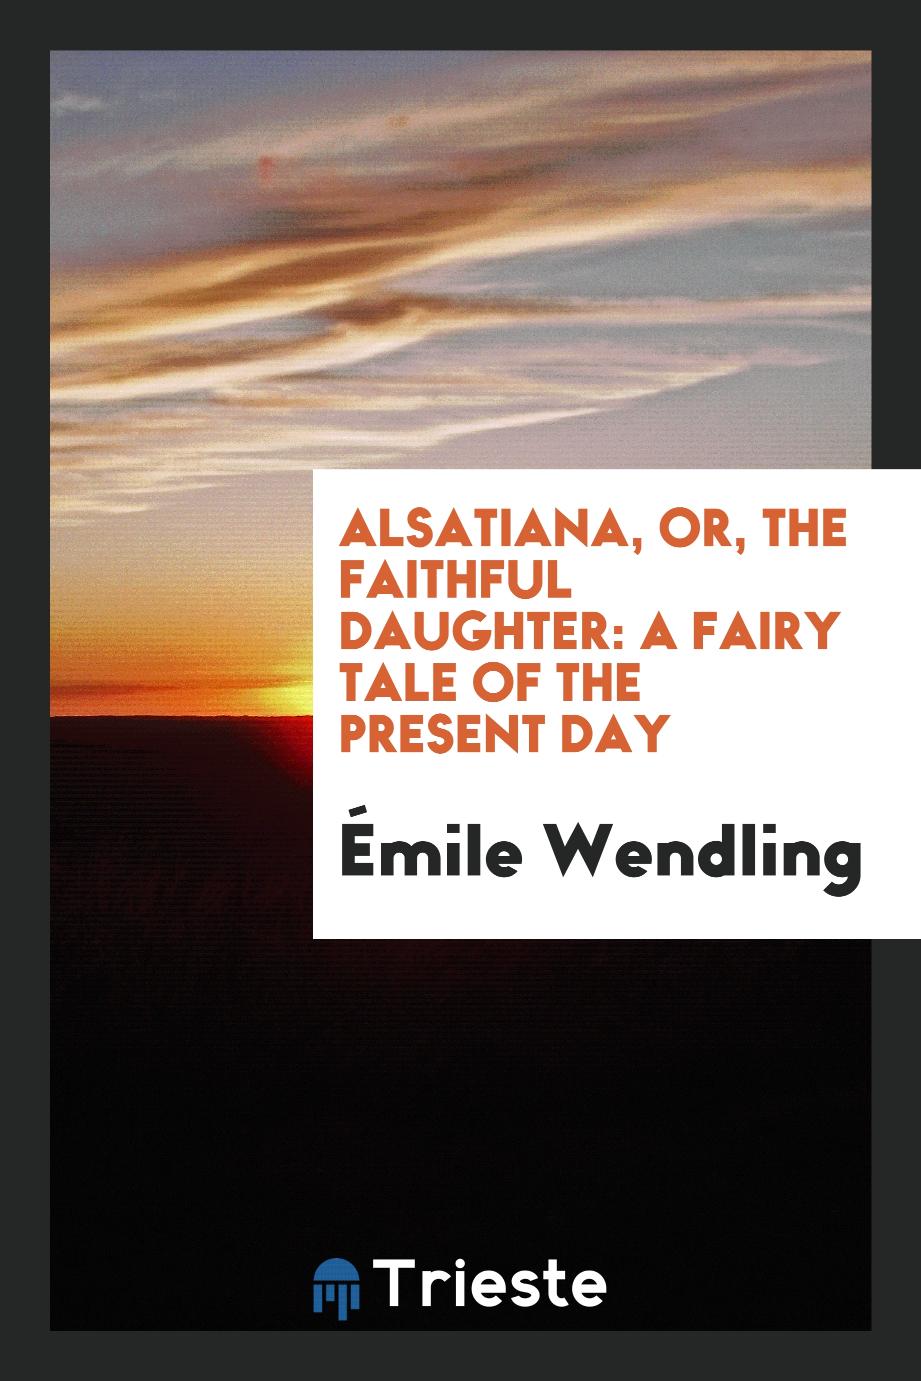 Alsatiana, Or, The Faithful Daughter: A Fairy Tale of the Present Day